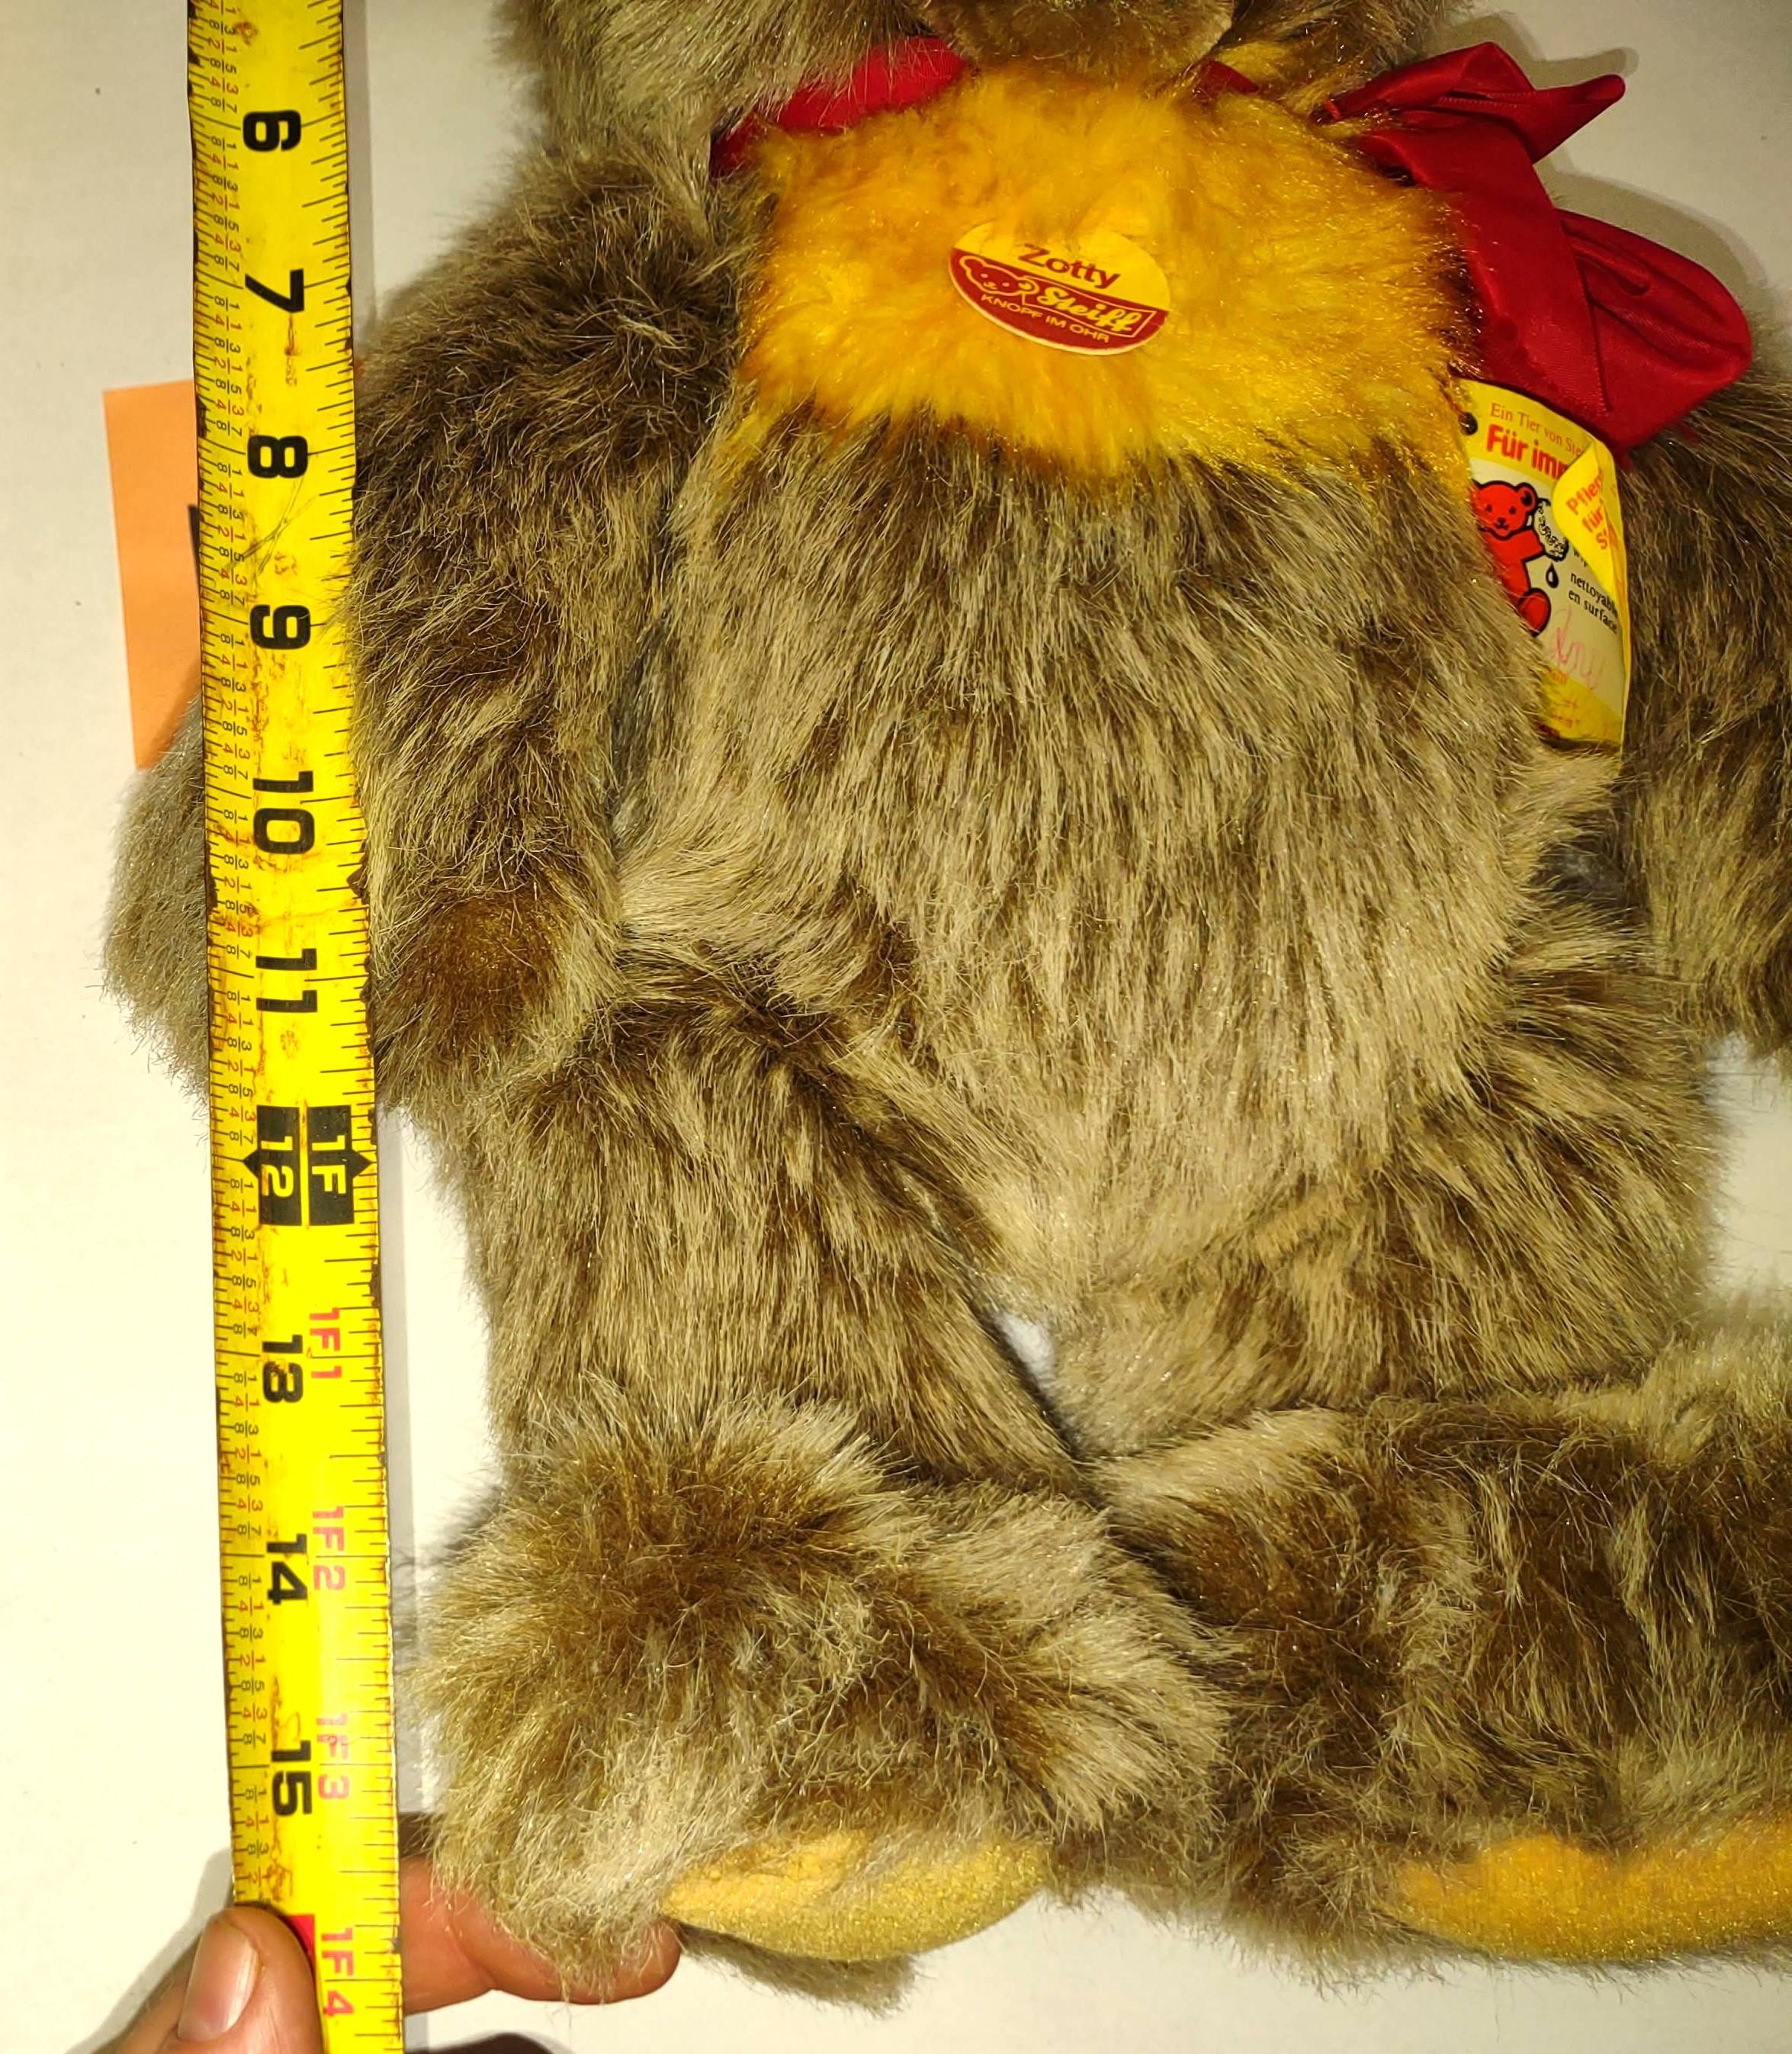 17" STEIFF BEAR "ZOTTY" with TAGS - WONDERFUL CONDITION